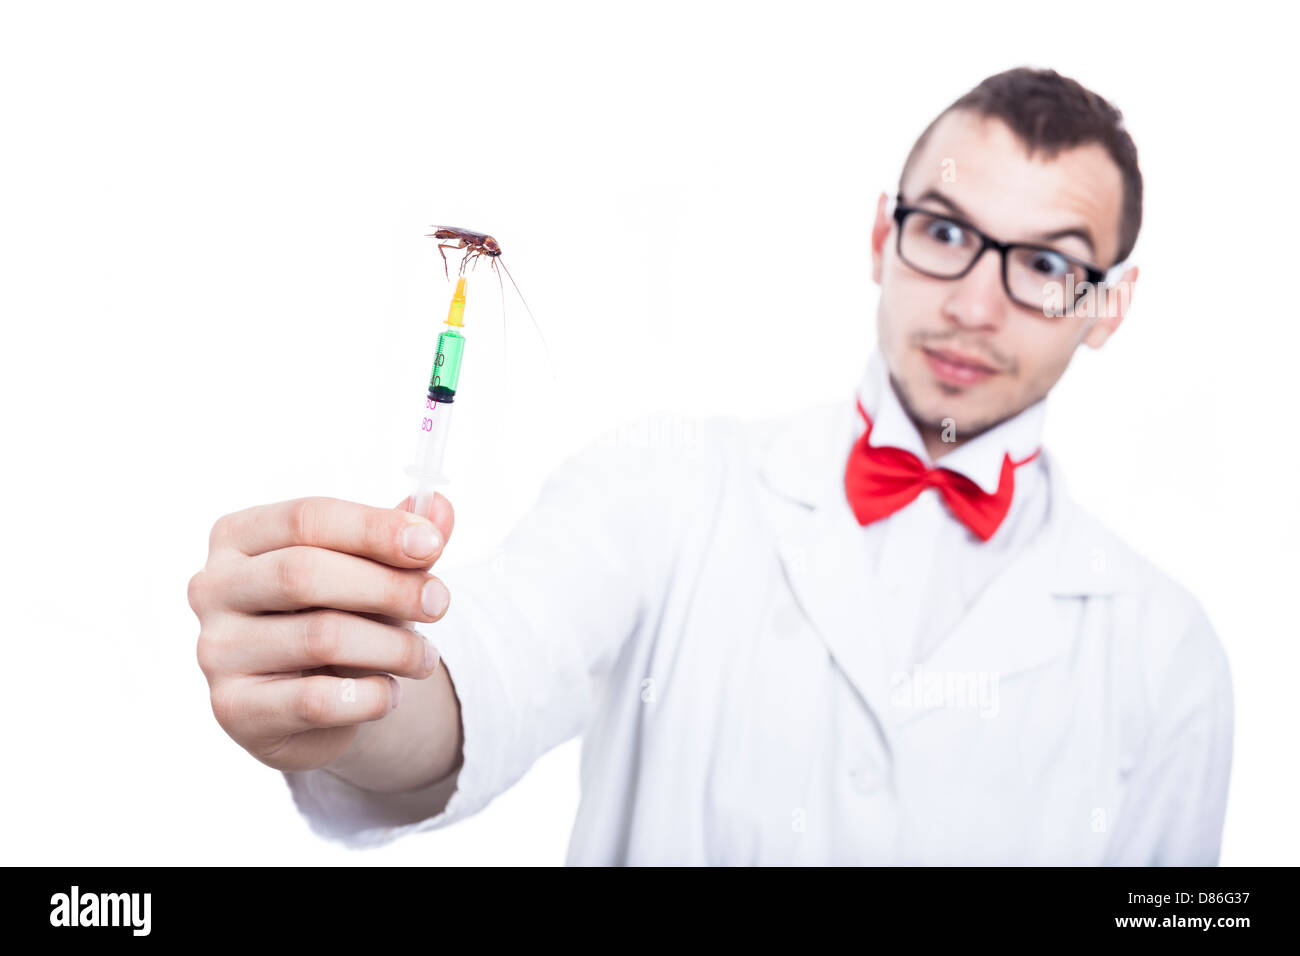 Funny scientist holding syringe with cockroach, isolated on white background Stock Photo